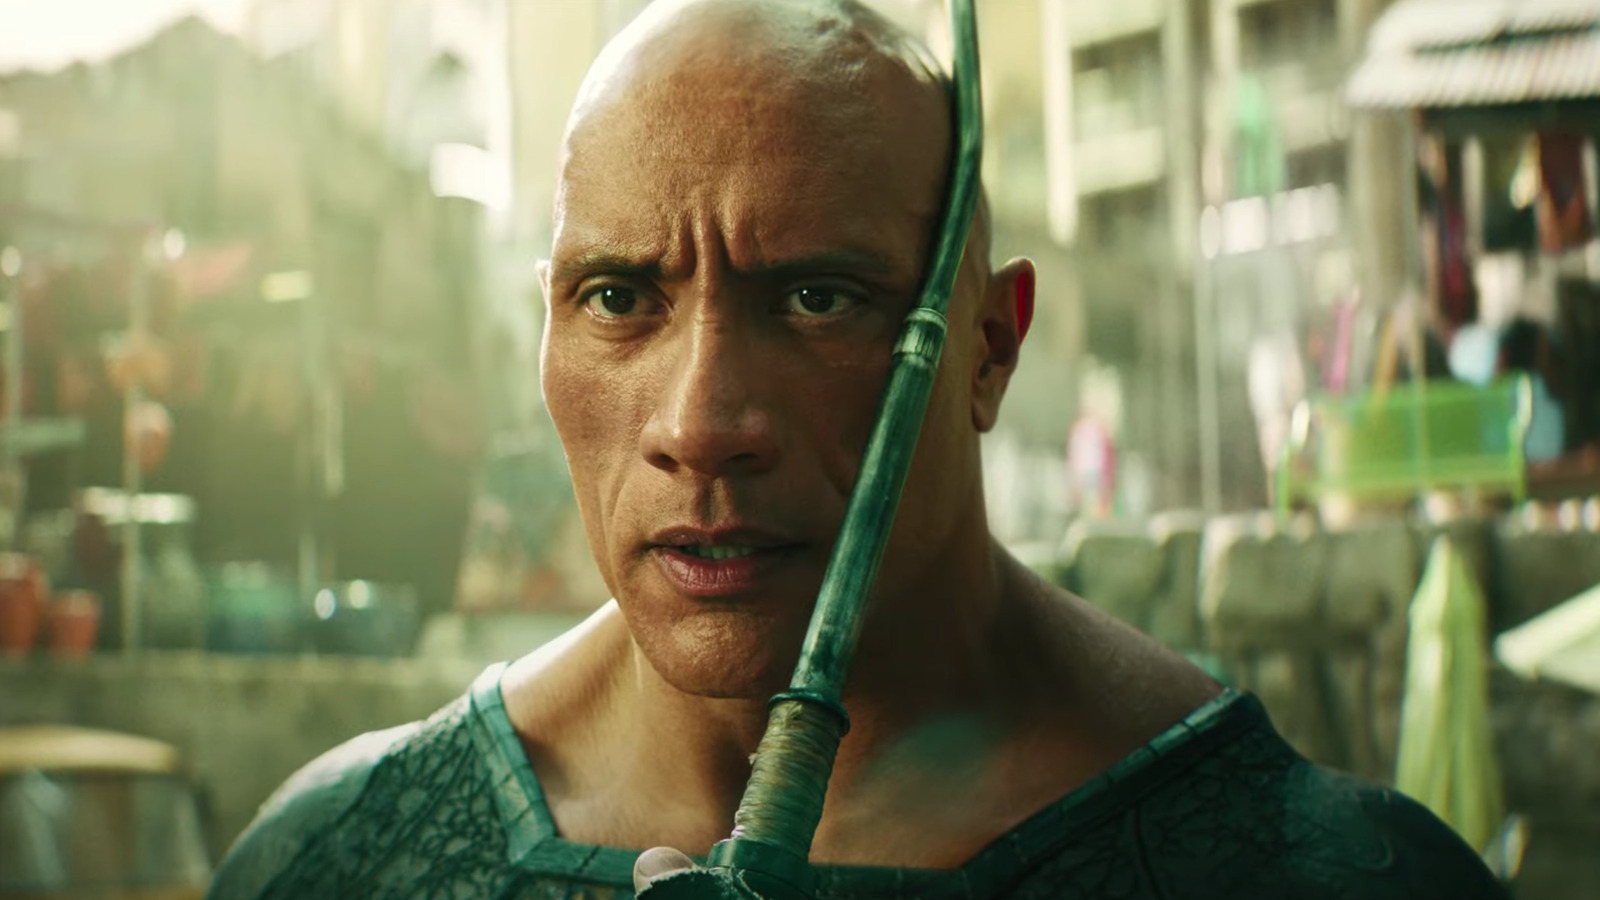 Dwayne Johnson trained for two consecutive years to play Black Adam